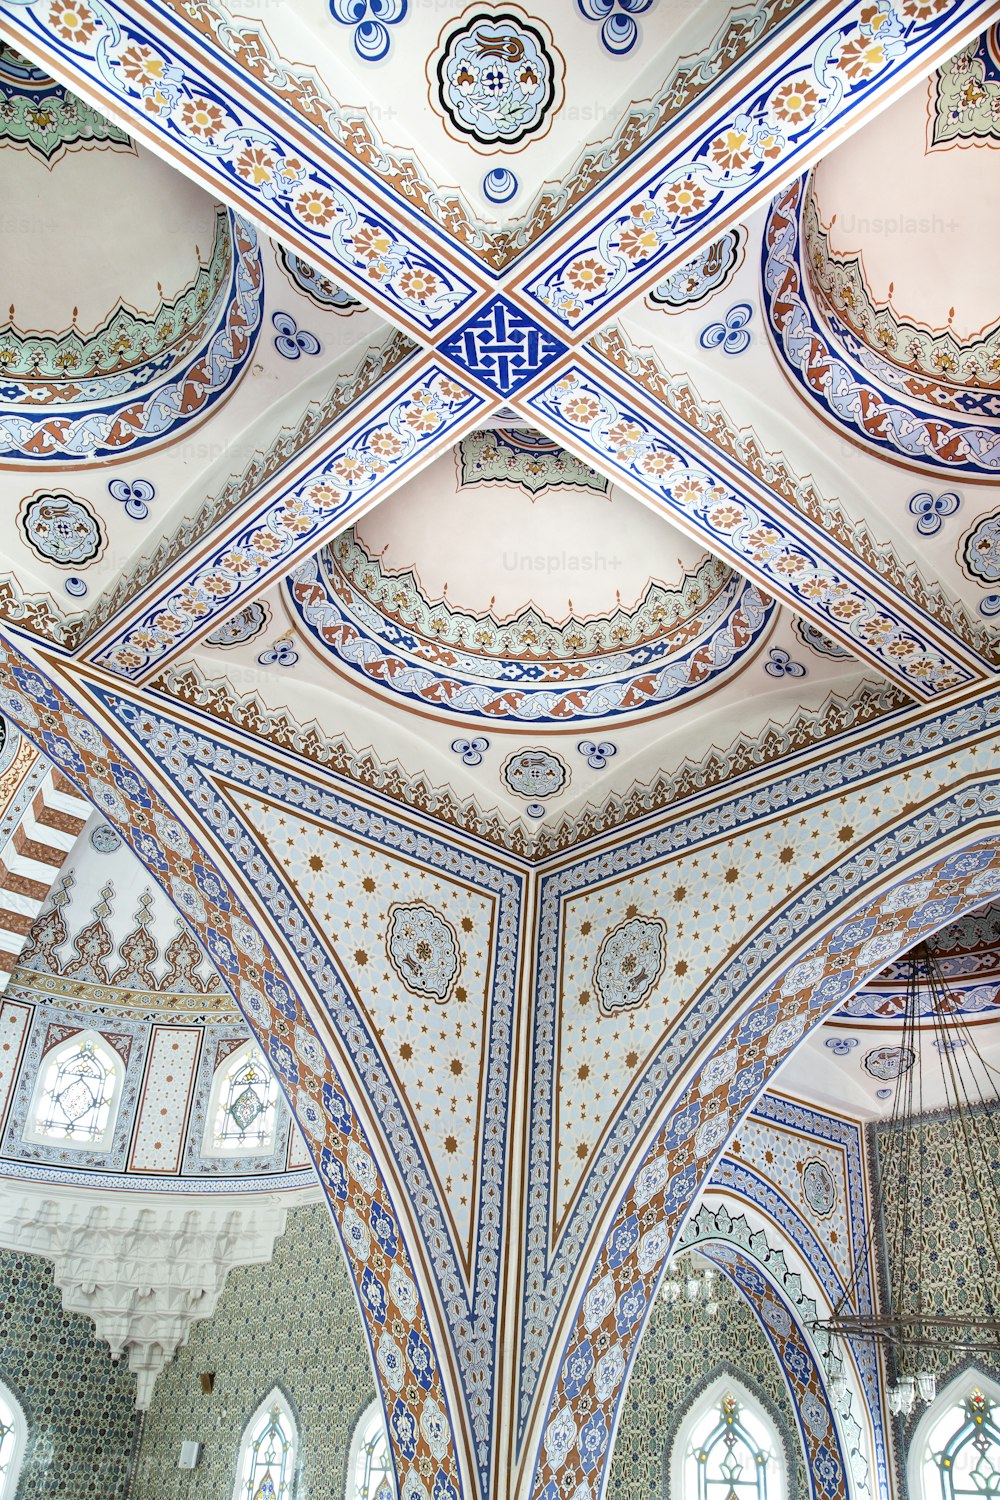 the ceiling of a building with intricate designs